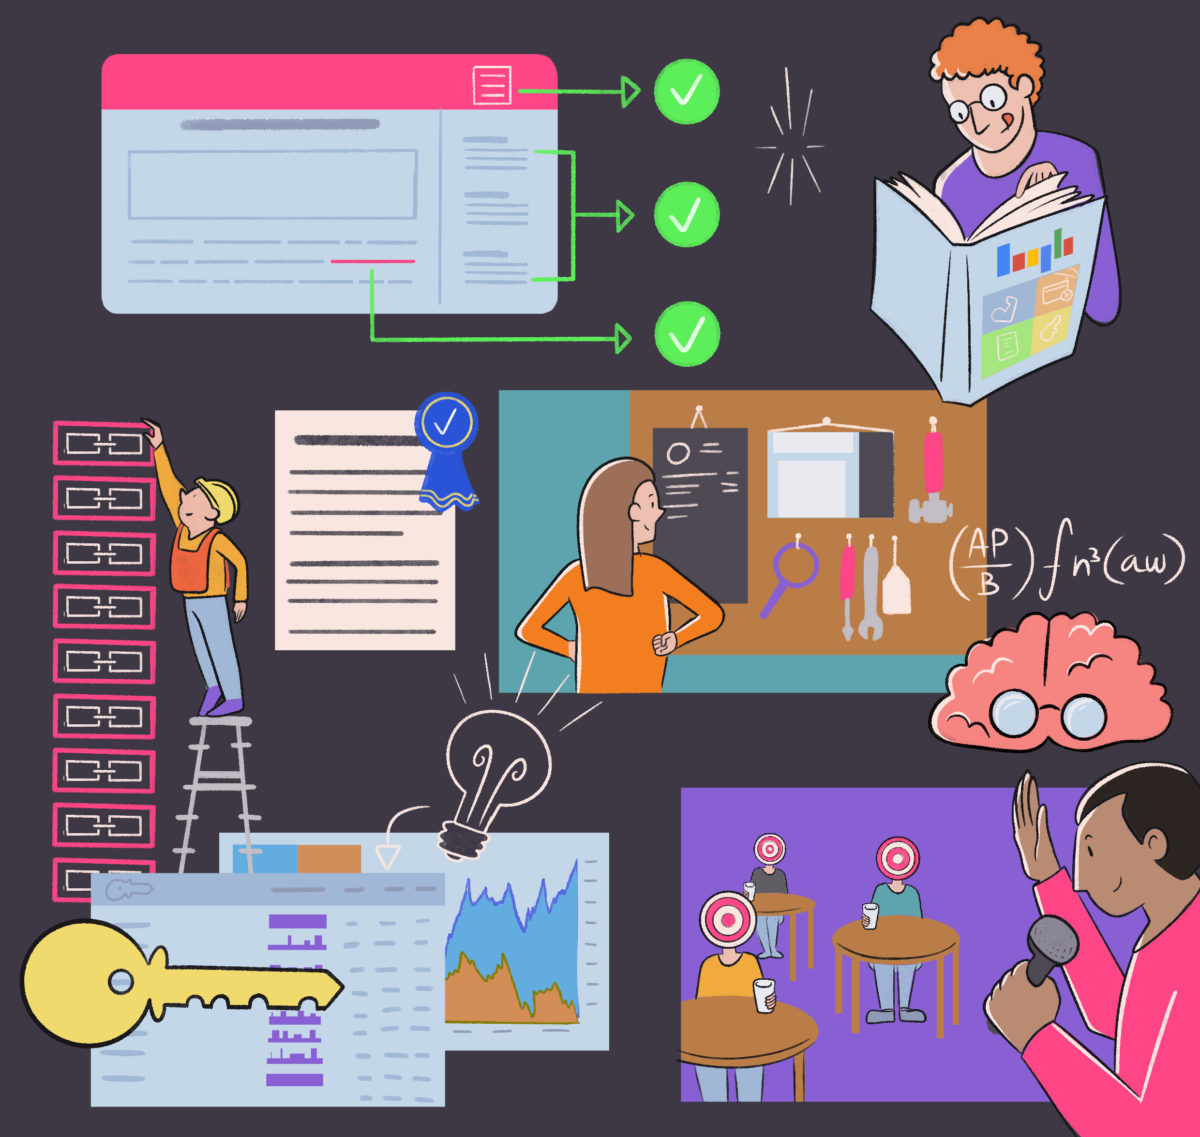 An illustration depicting various aspects of problem-solving and learning, including research, reading, brainstorming, analysis, and collaboration.